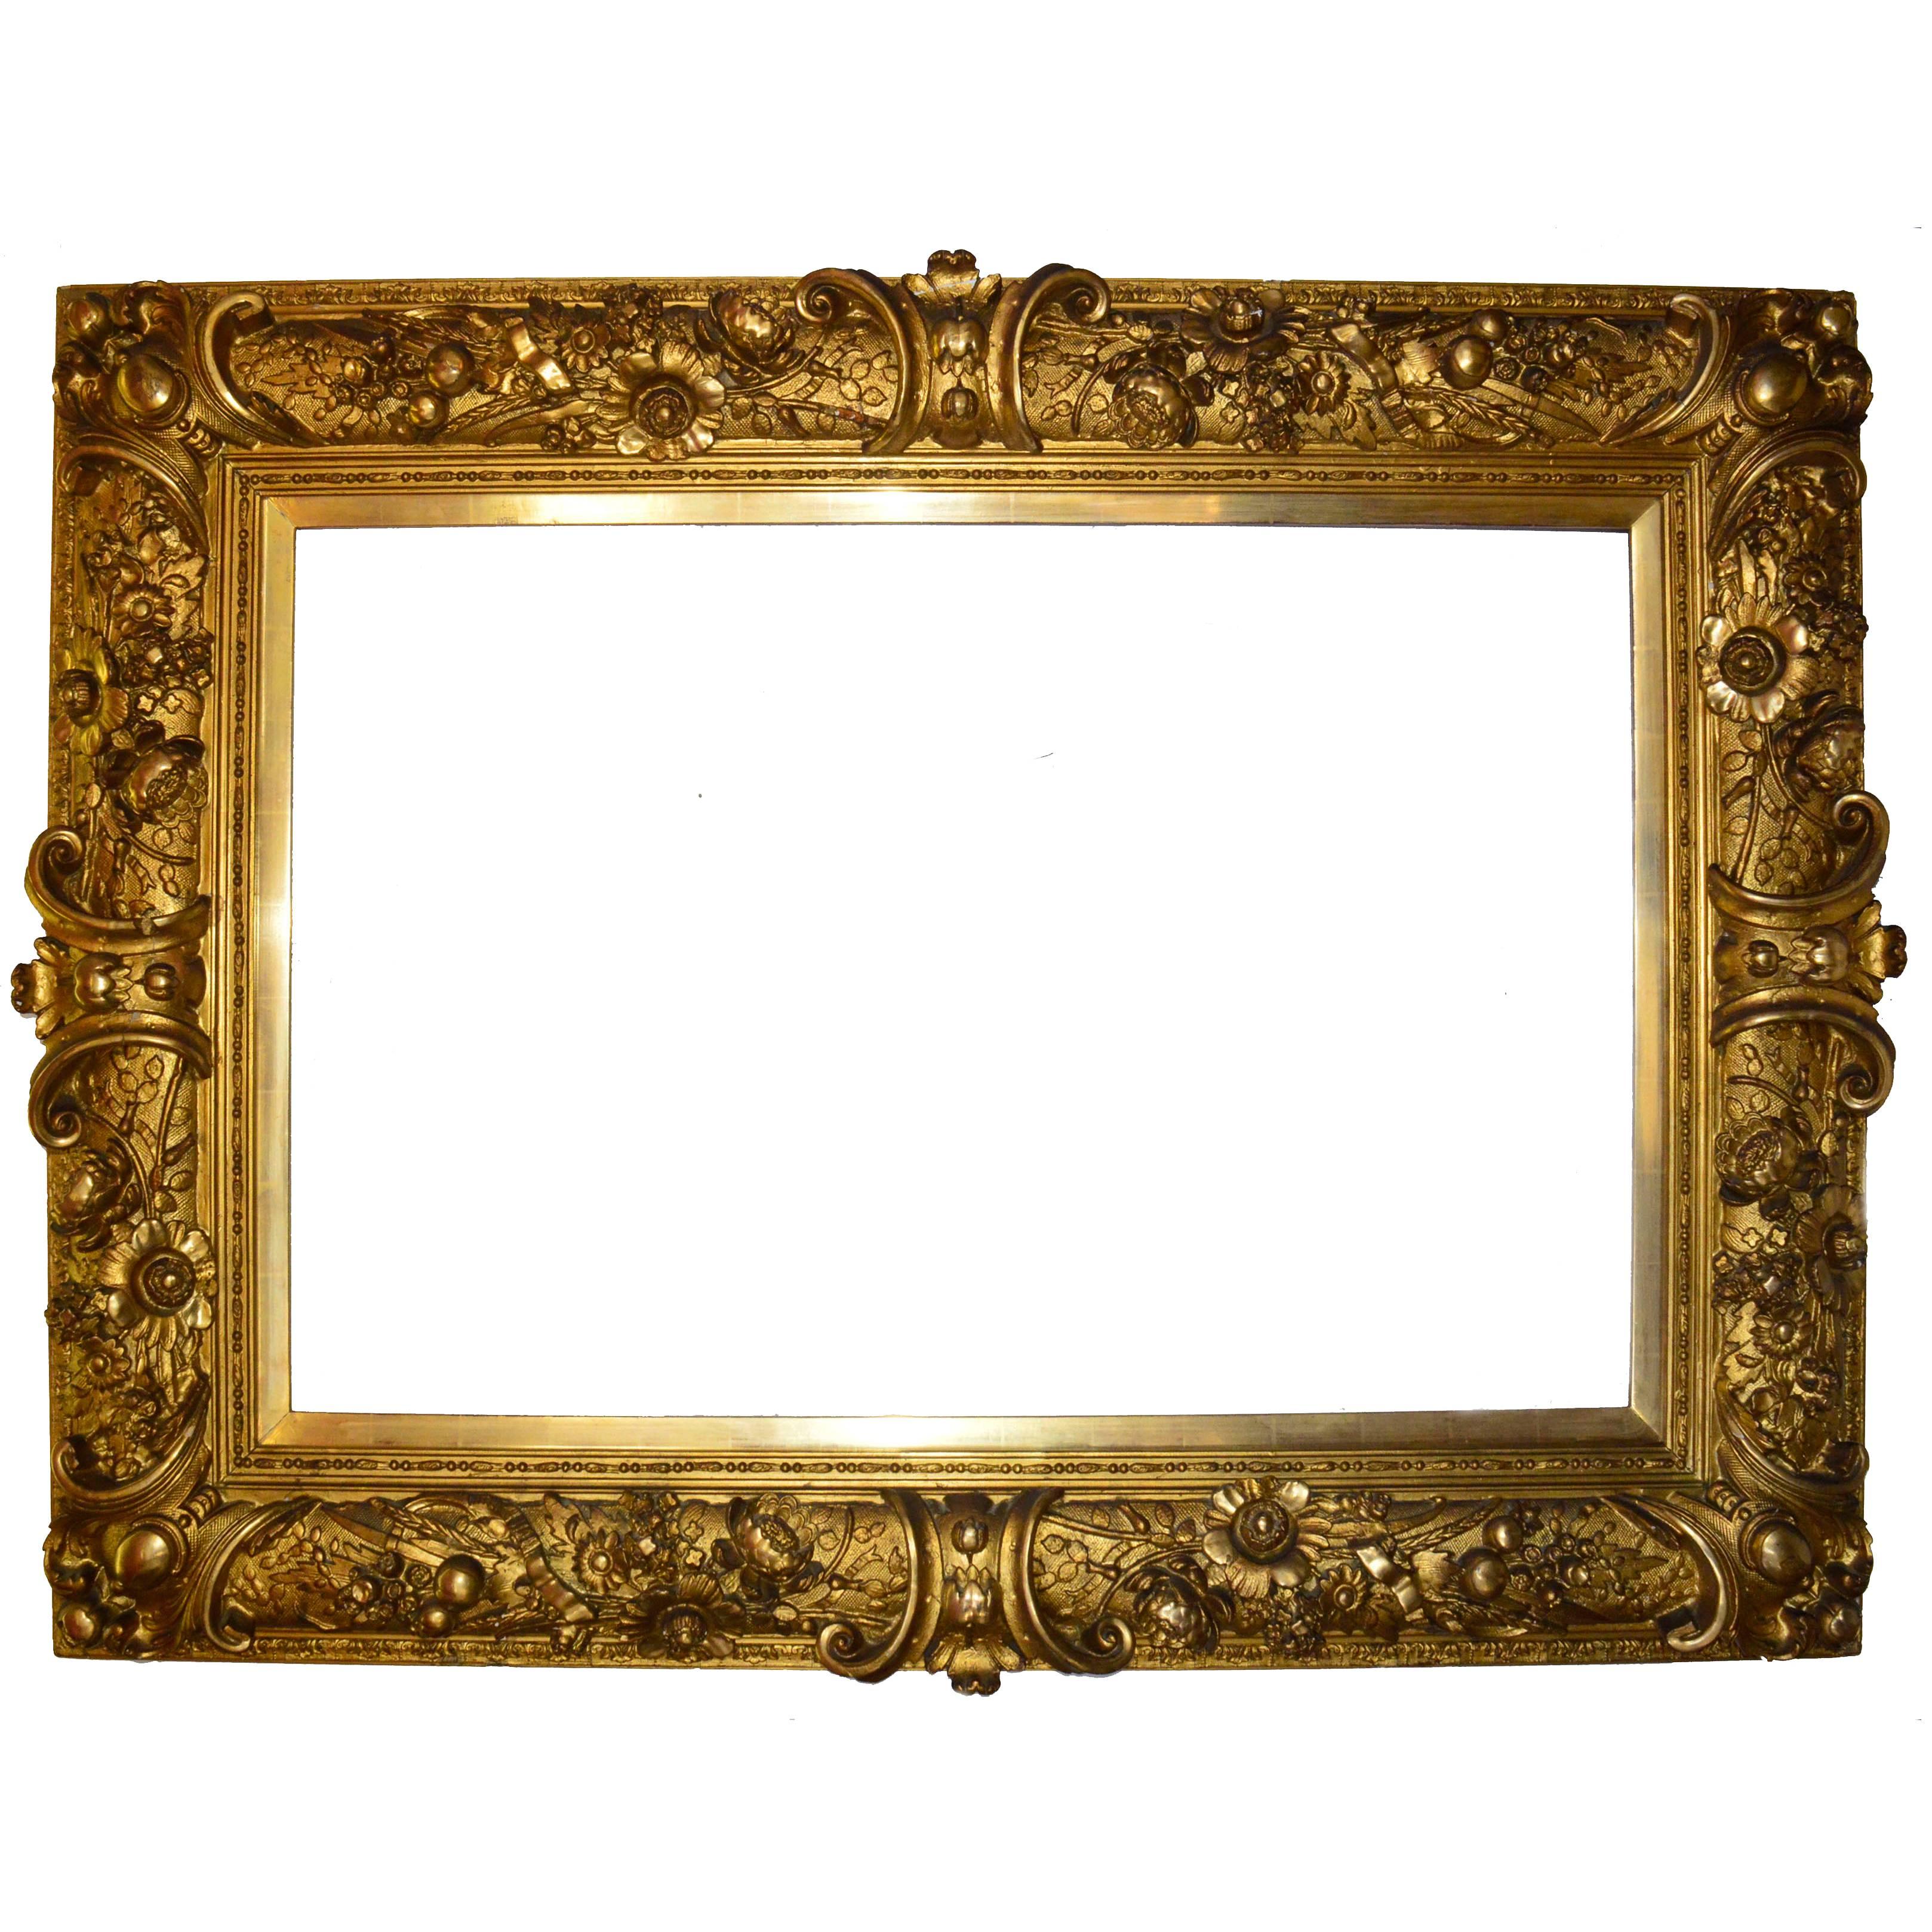 Large Baroque-Style Painting or Mirror Frame